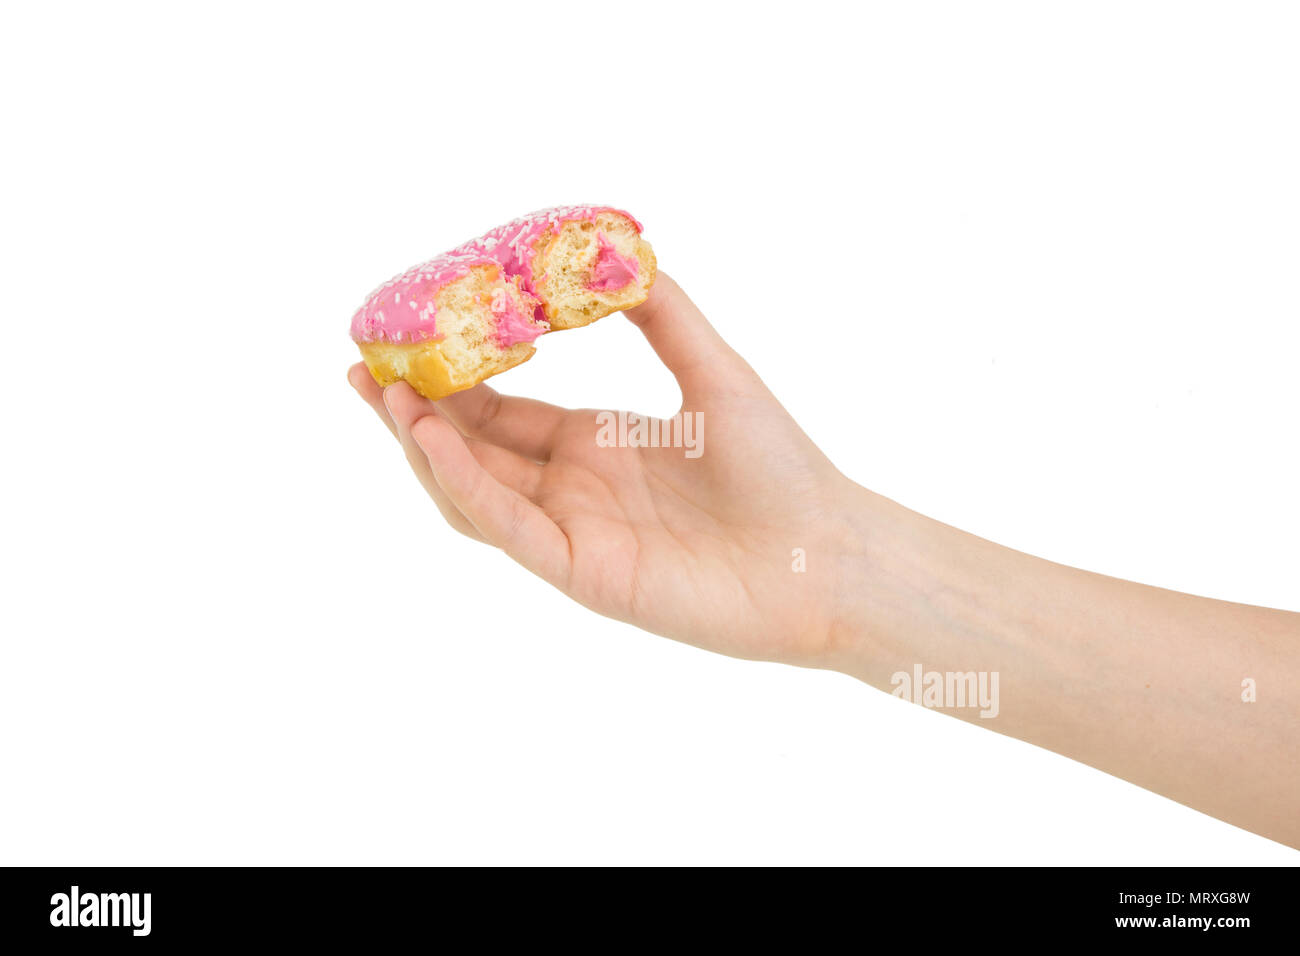 Hold Handing Delicious Pink Bitten Donut With Pink Cream Inside. Isolated On White Background Stock Photo